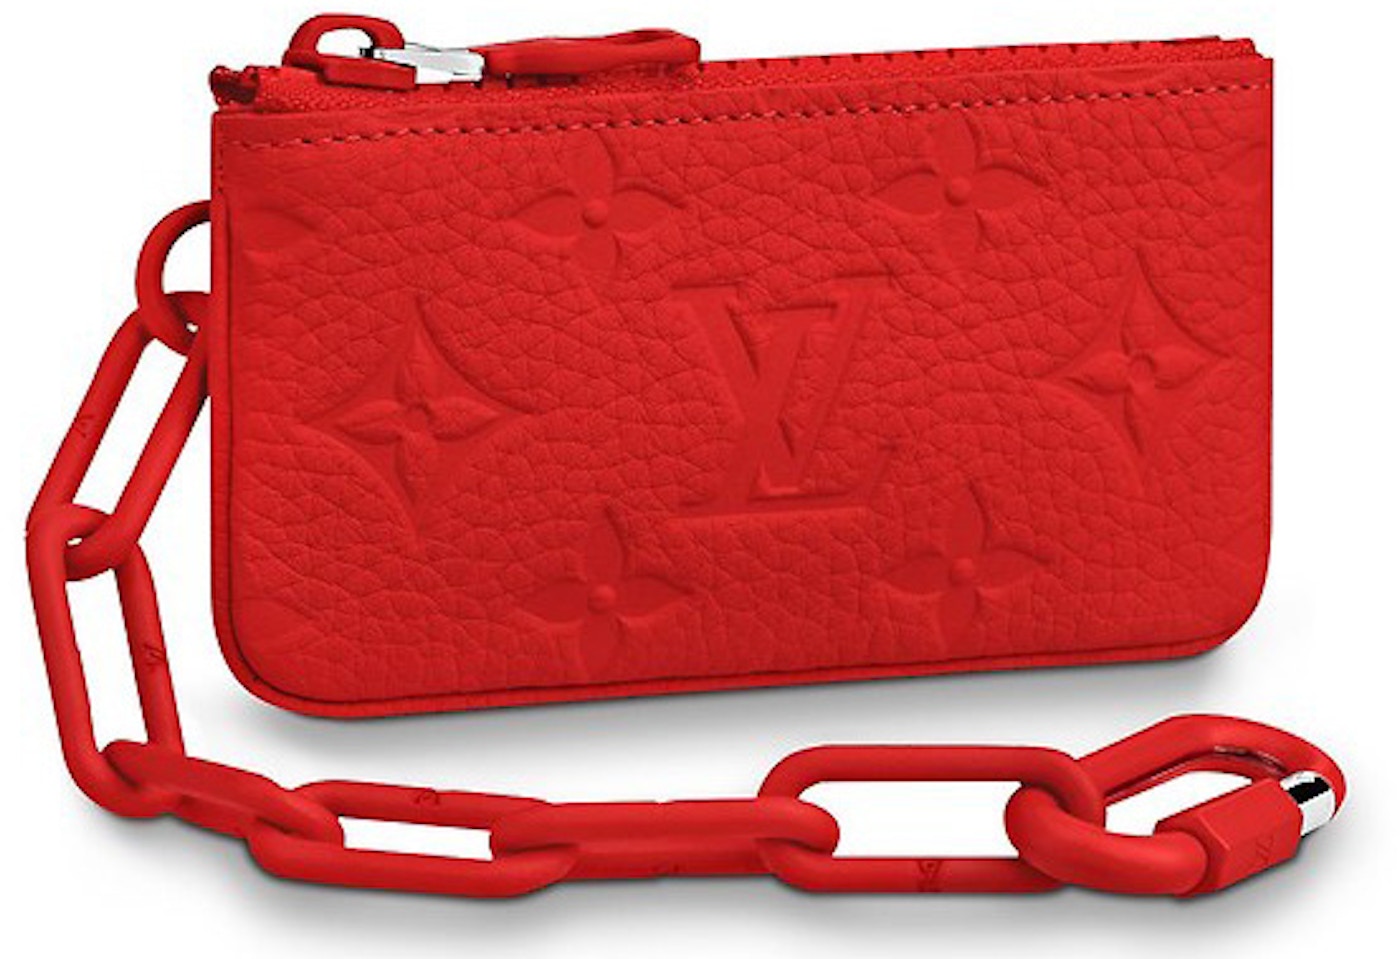 Gladys Paranafloden jomfru Louis Vuitton Pochette Cle Monogram Red in Taurillon Leather with  Tone-on-Tone